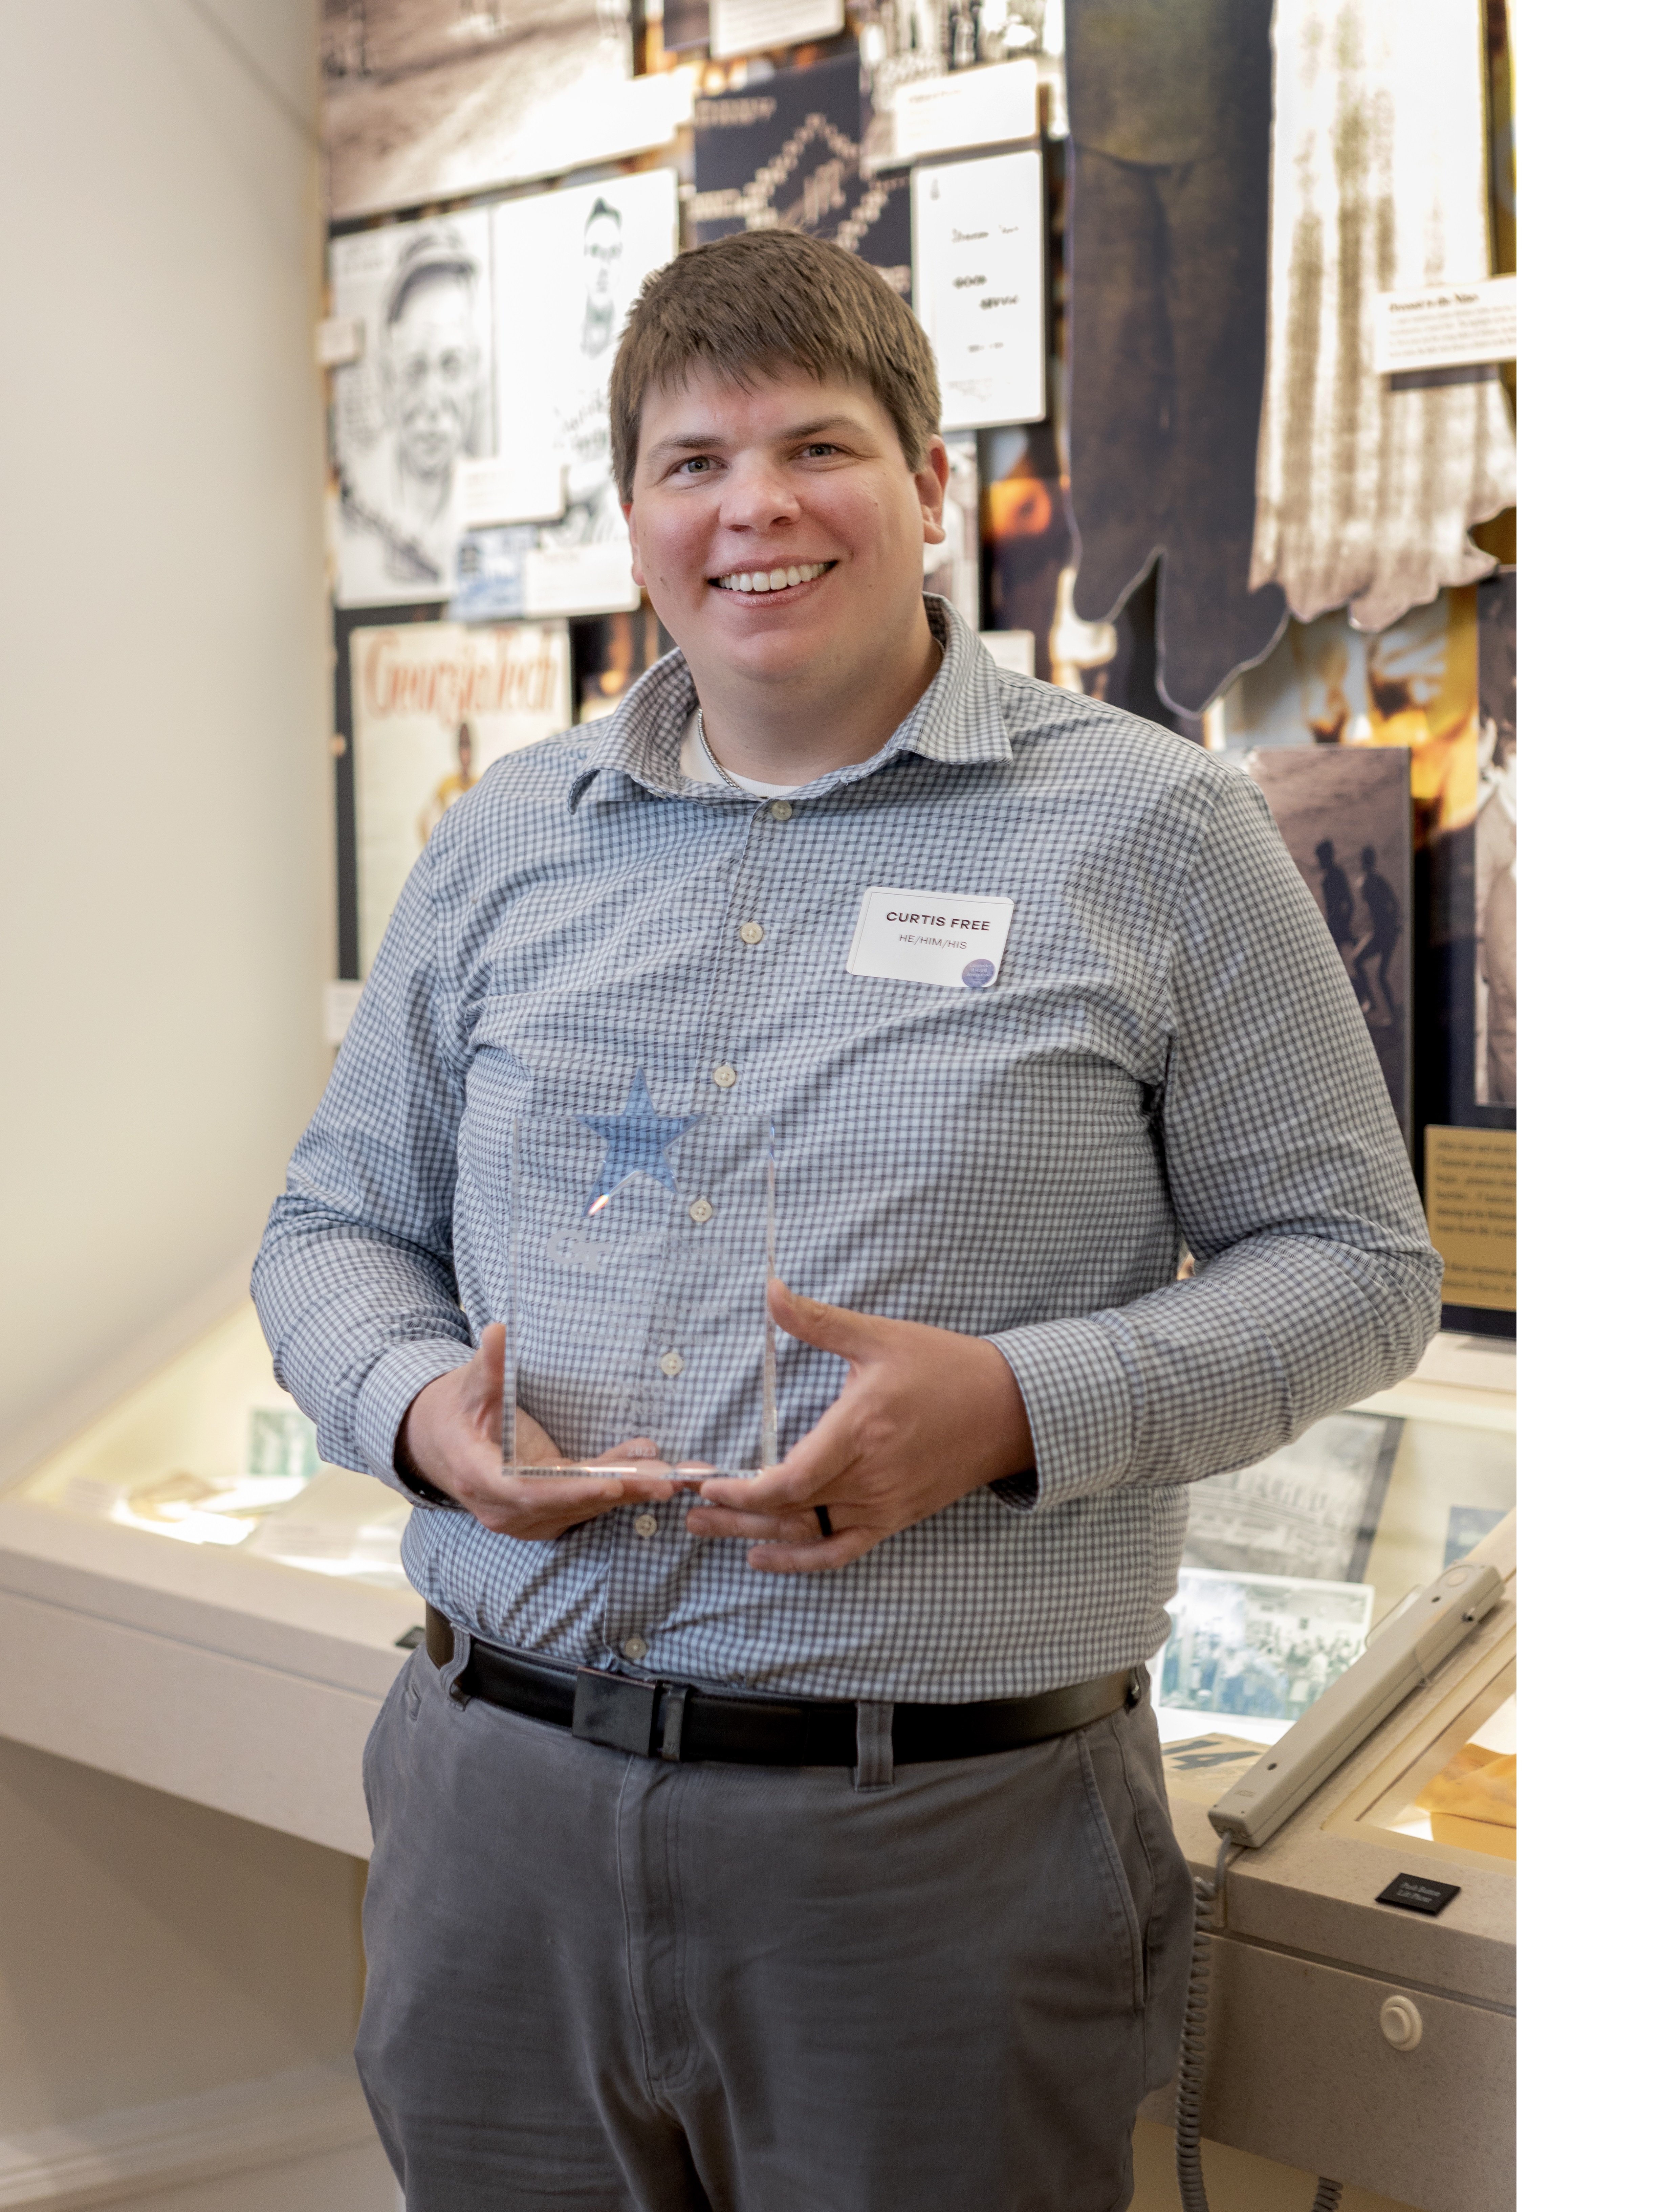 GTRI Senior Research Scientist Curtis Free was recognized at the recent Georgia Tech Lavender Awards, receiving the Billiee Pendleton-Parker Award for Outstanding Allyship.